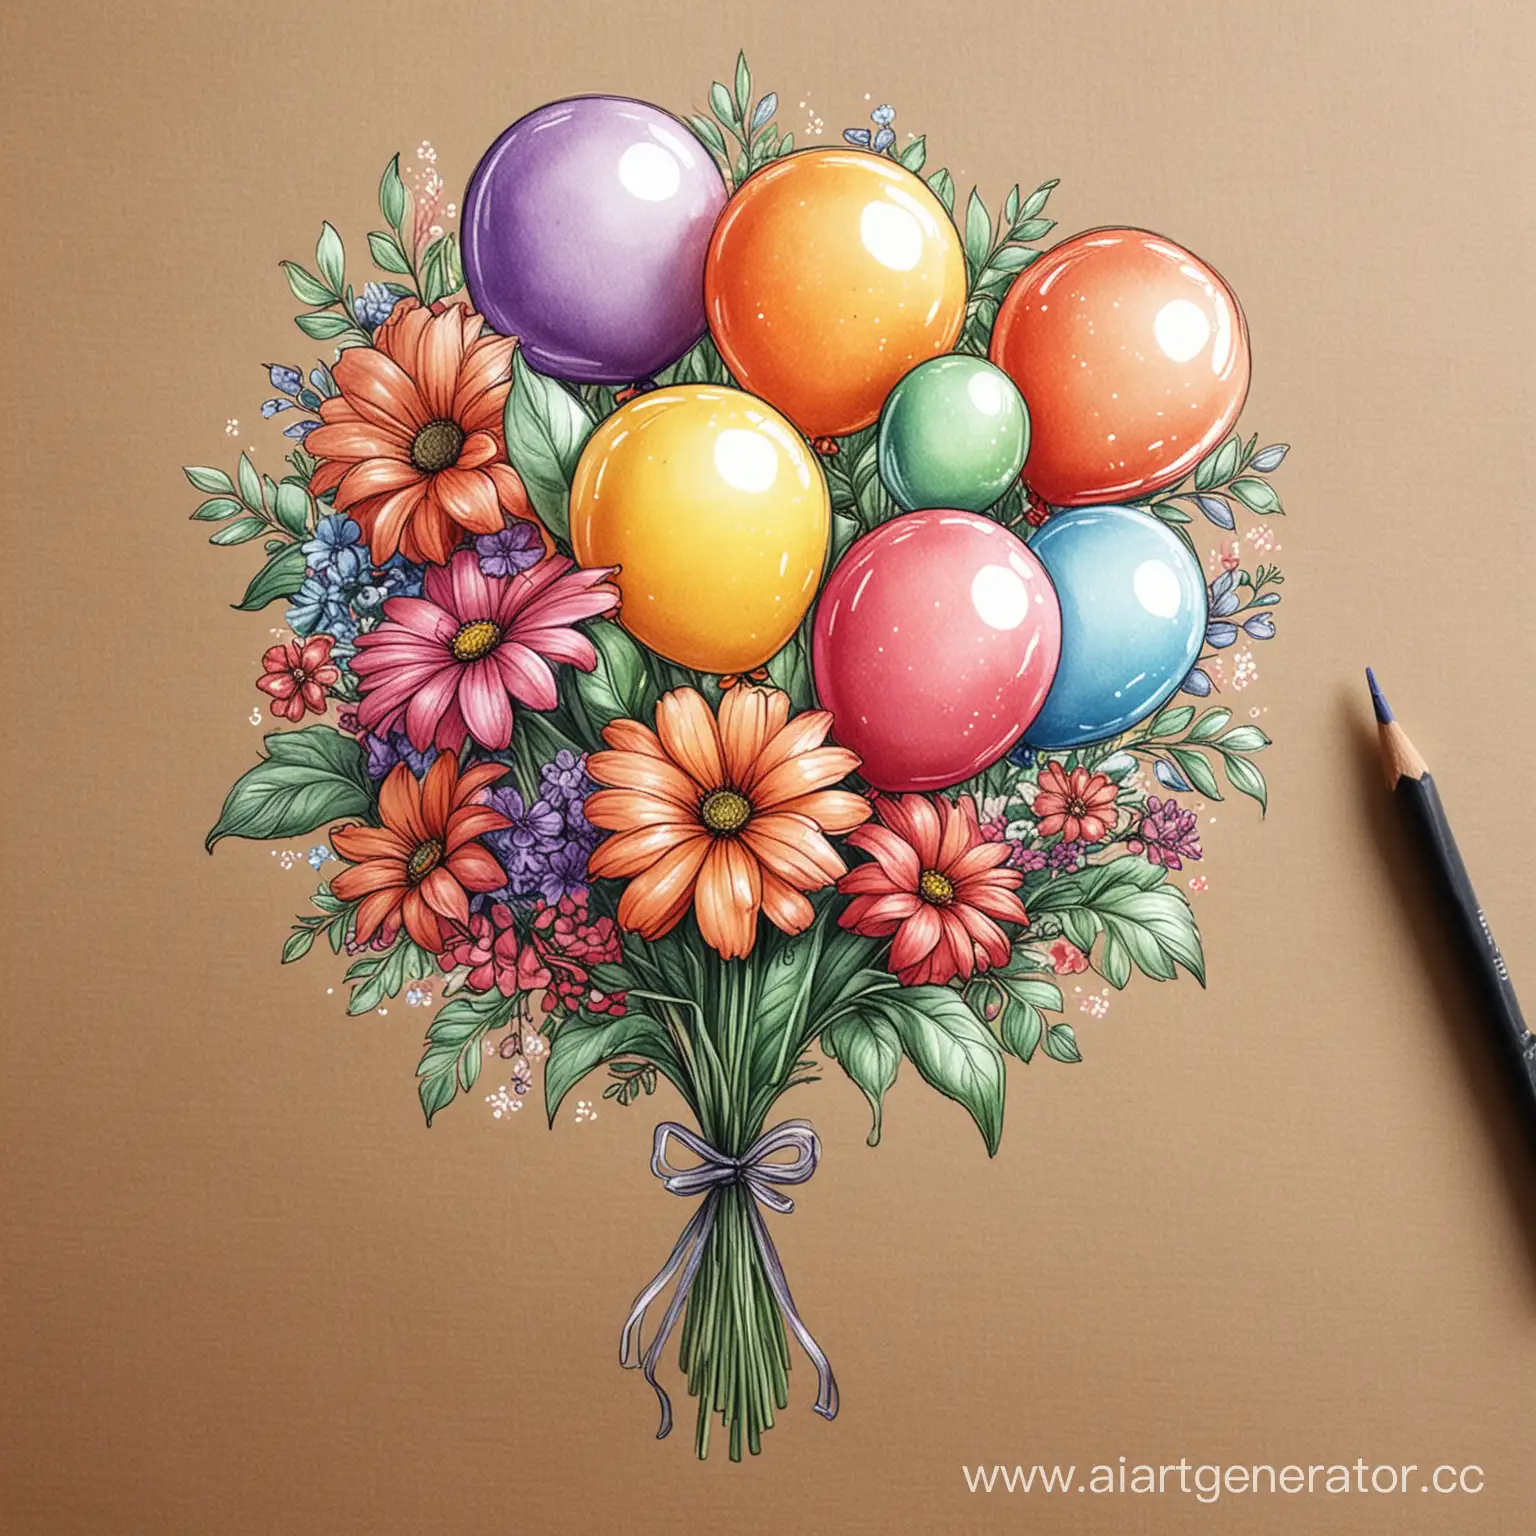 Cheerful-Bouquet-of-Bright-Flowers-with-Balloon